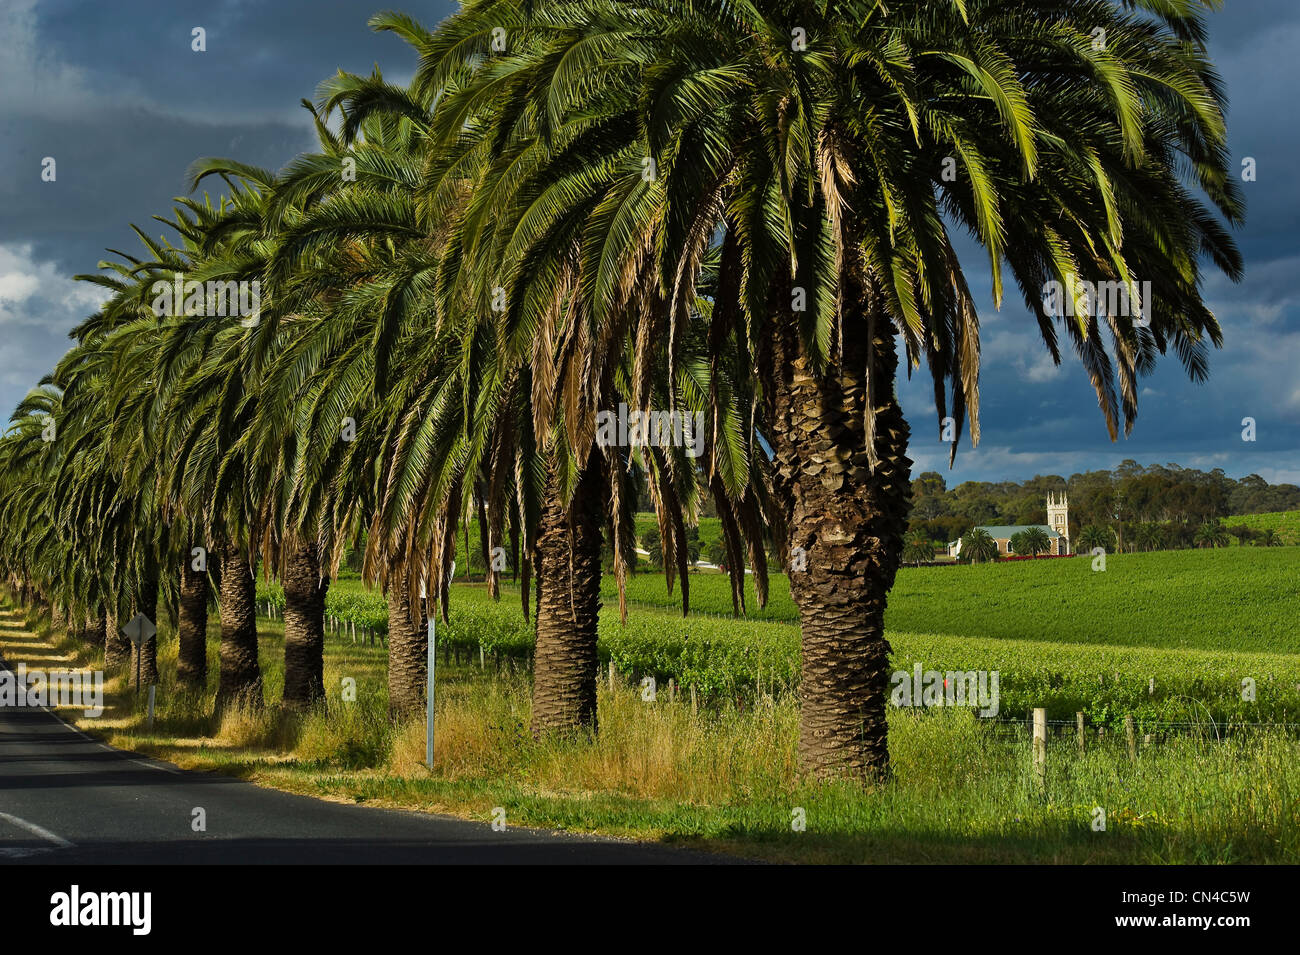 Australia, South Australia, Barossa Valley, the famous Seppeltsfield road surrounded by vineyard and palm trees is passing by Stock Photo